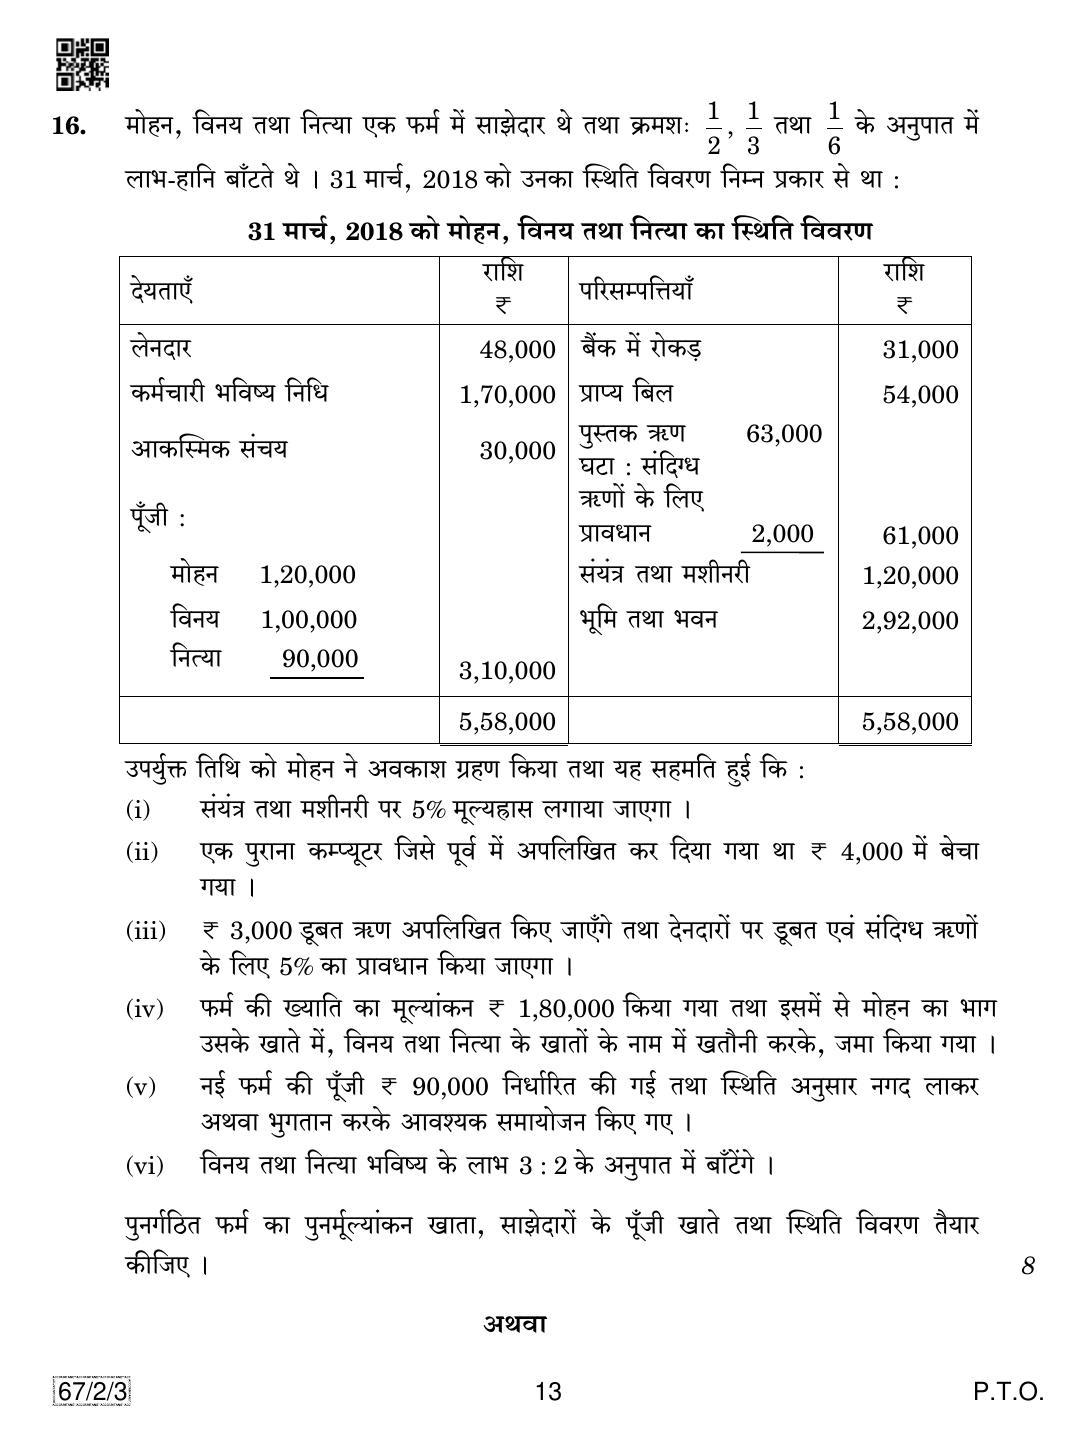 CBSE Class 12 67-2-3 Accountancy 2019 Question Paper - Page 13